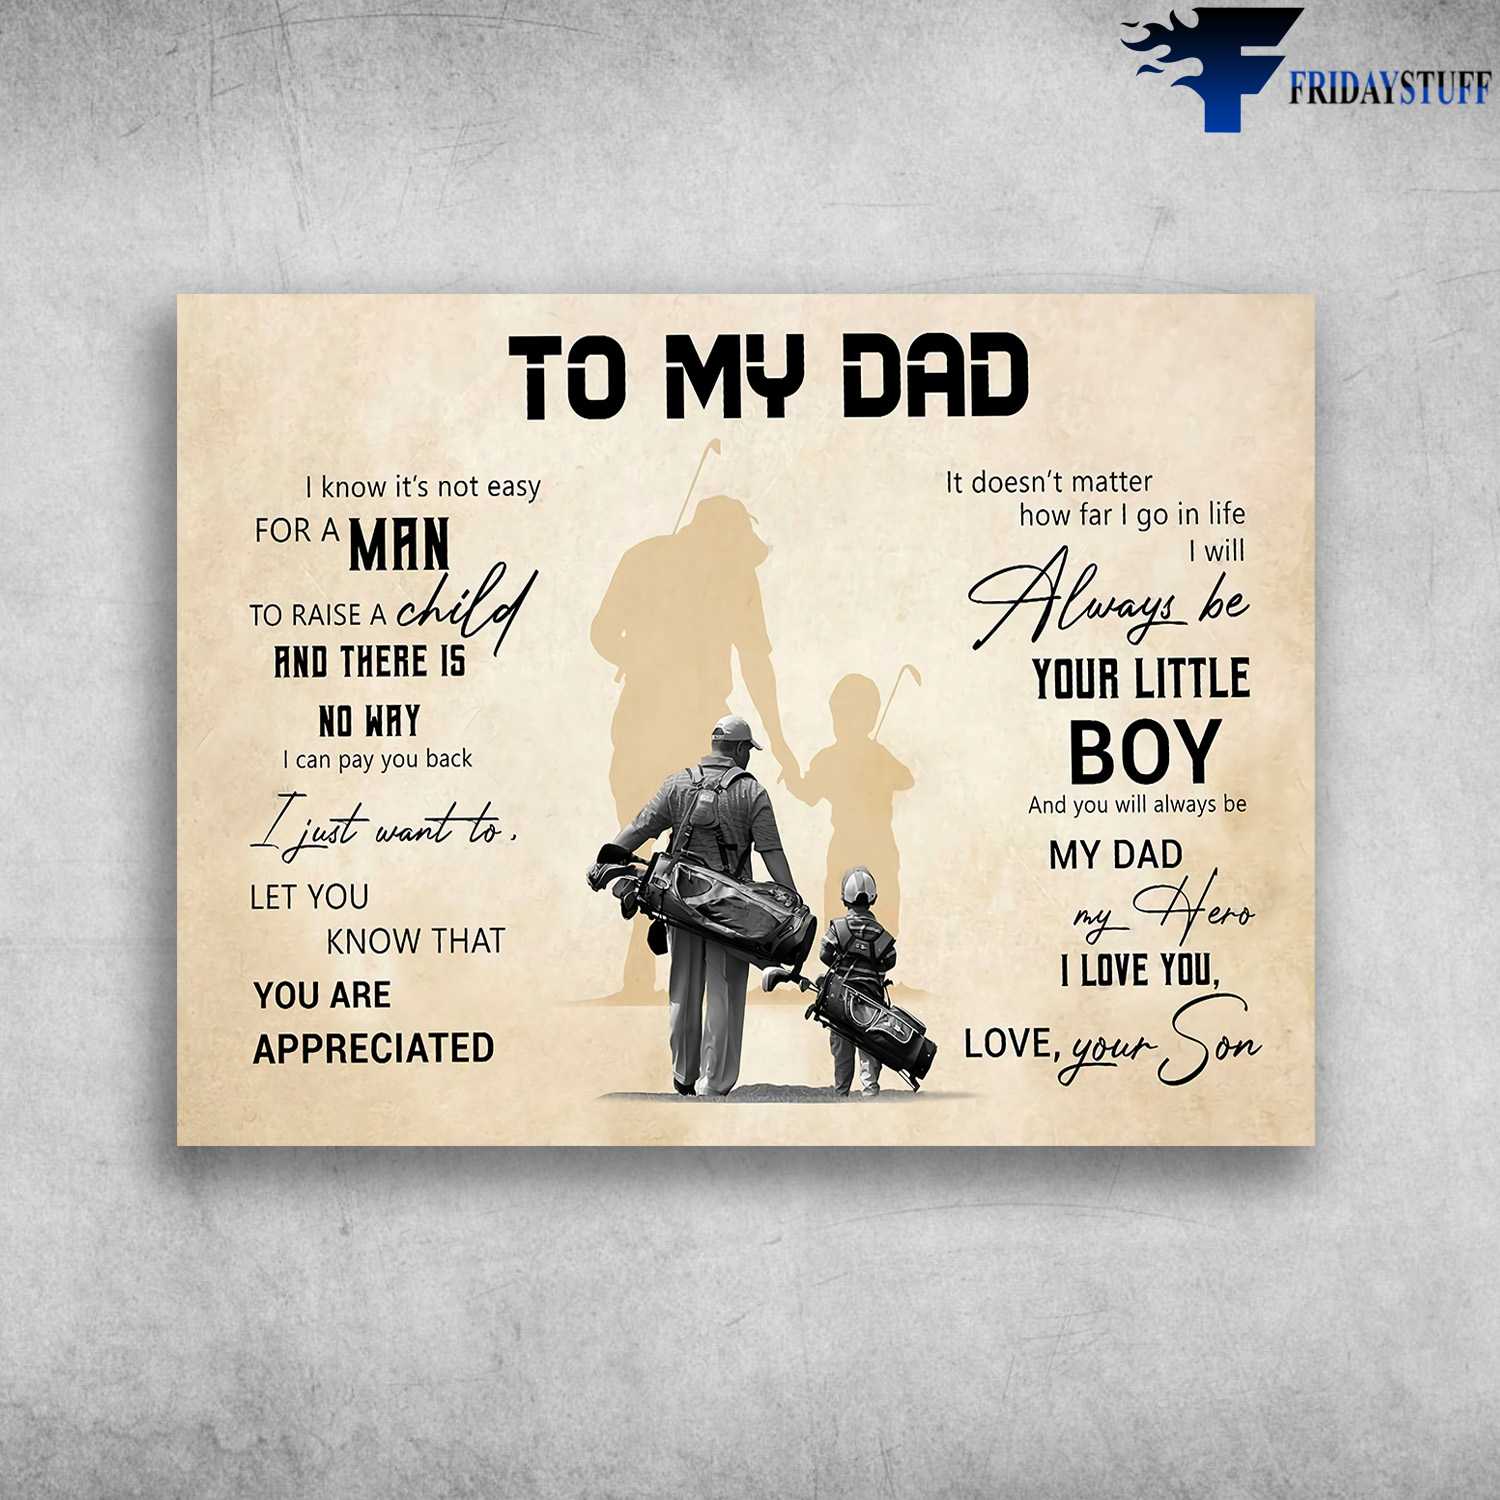 Dad And Son Golf - To My Dad, I Know It's Not Easy For A Man, To Raise A Child, And There Is No Way, I Can Play You Back, I Just Want To Let You Know That, You Are Appreciated